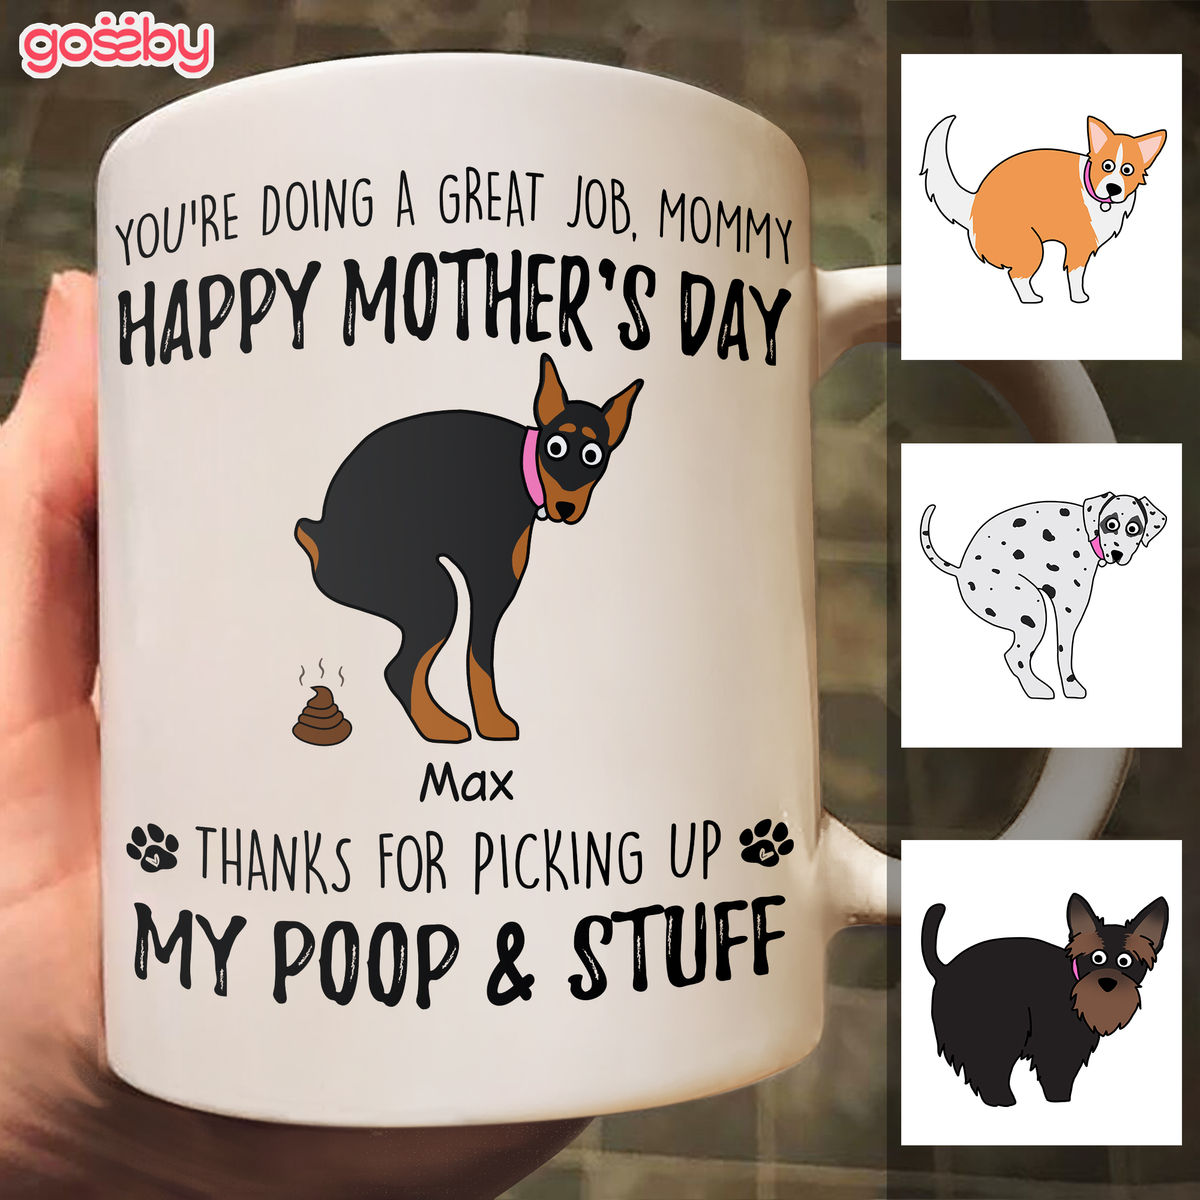 You're Doing A Great Job Mommy Happy Mother's Day - Thanks For Picking Up My Poop & Stuff (43051)